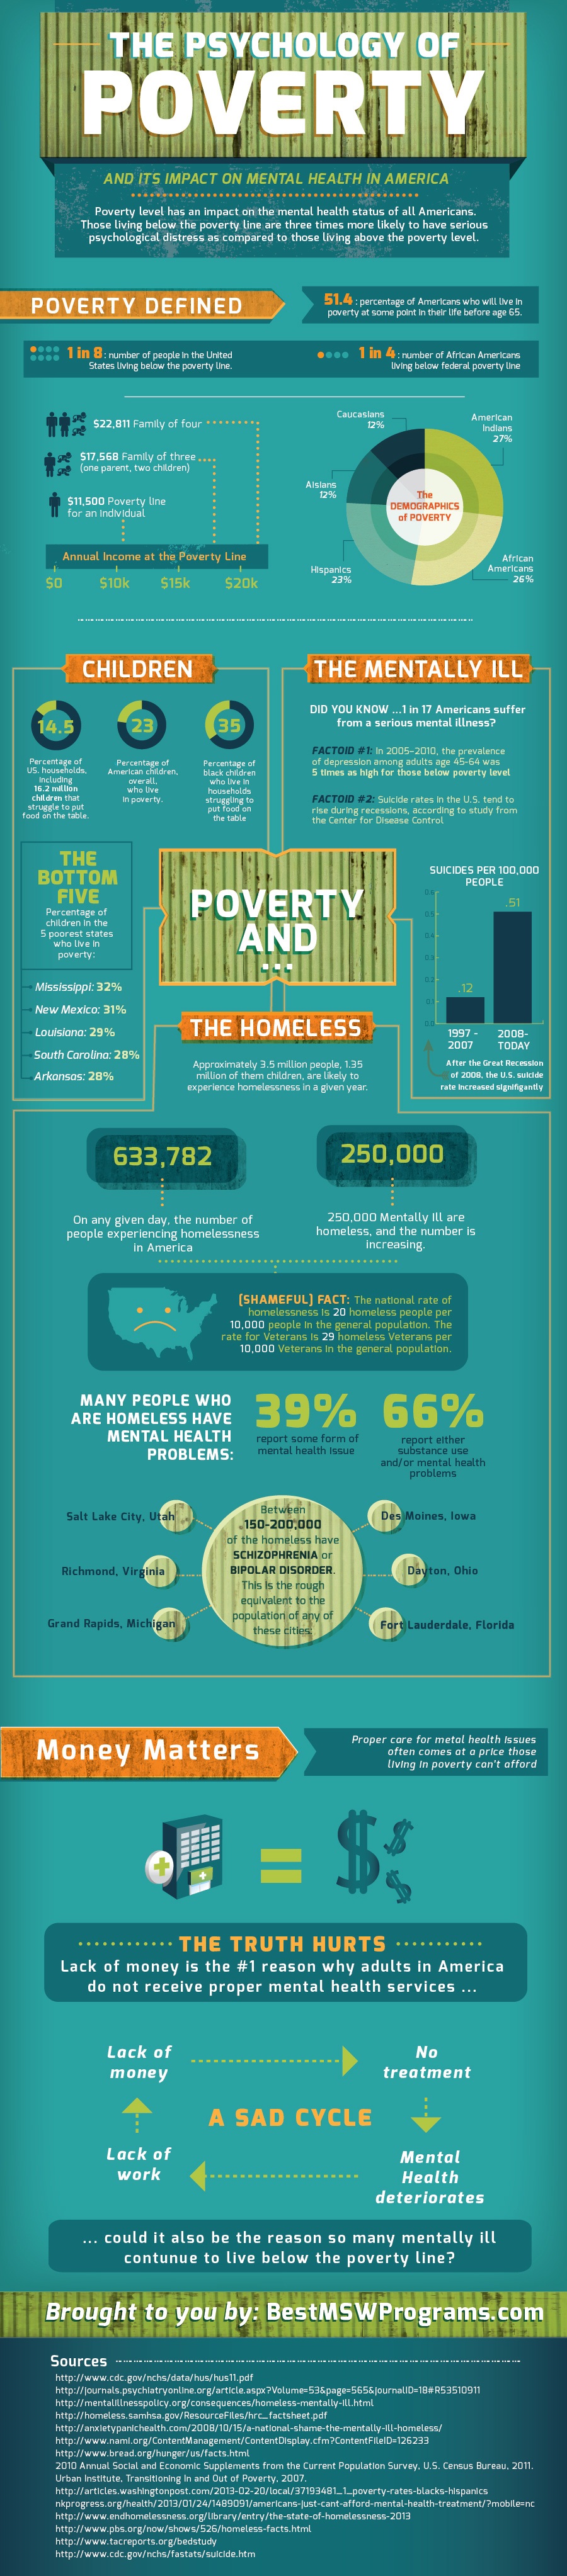 The Psychology of Poverty and Its Impact on Mental Health